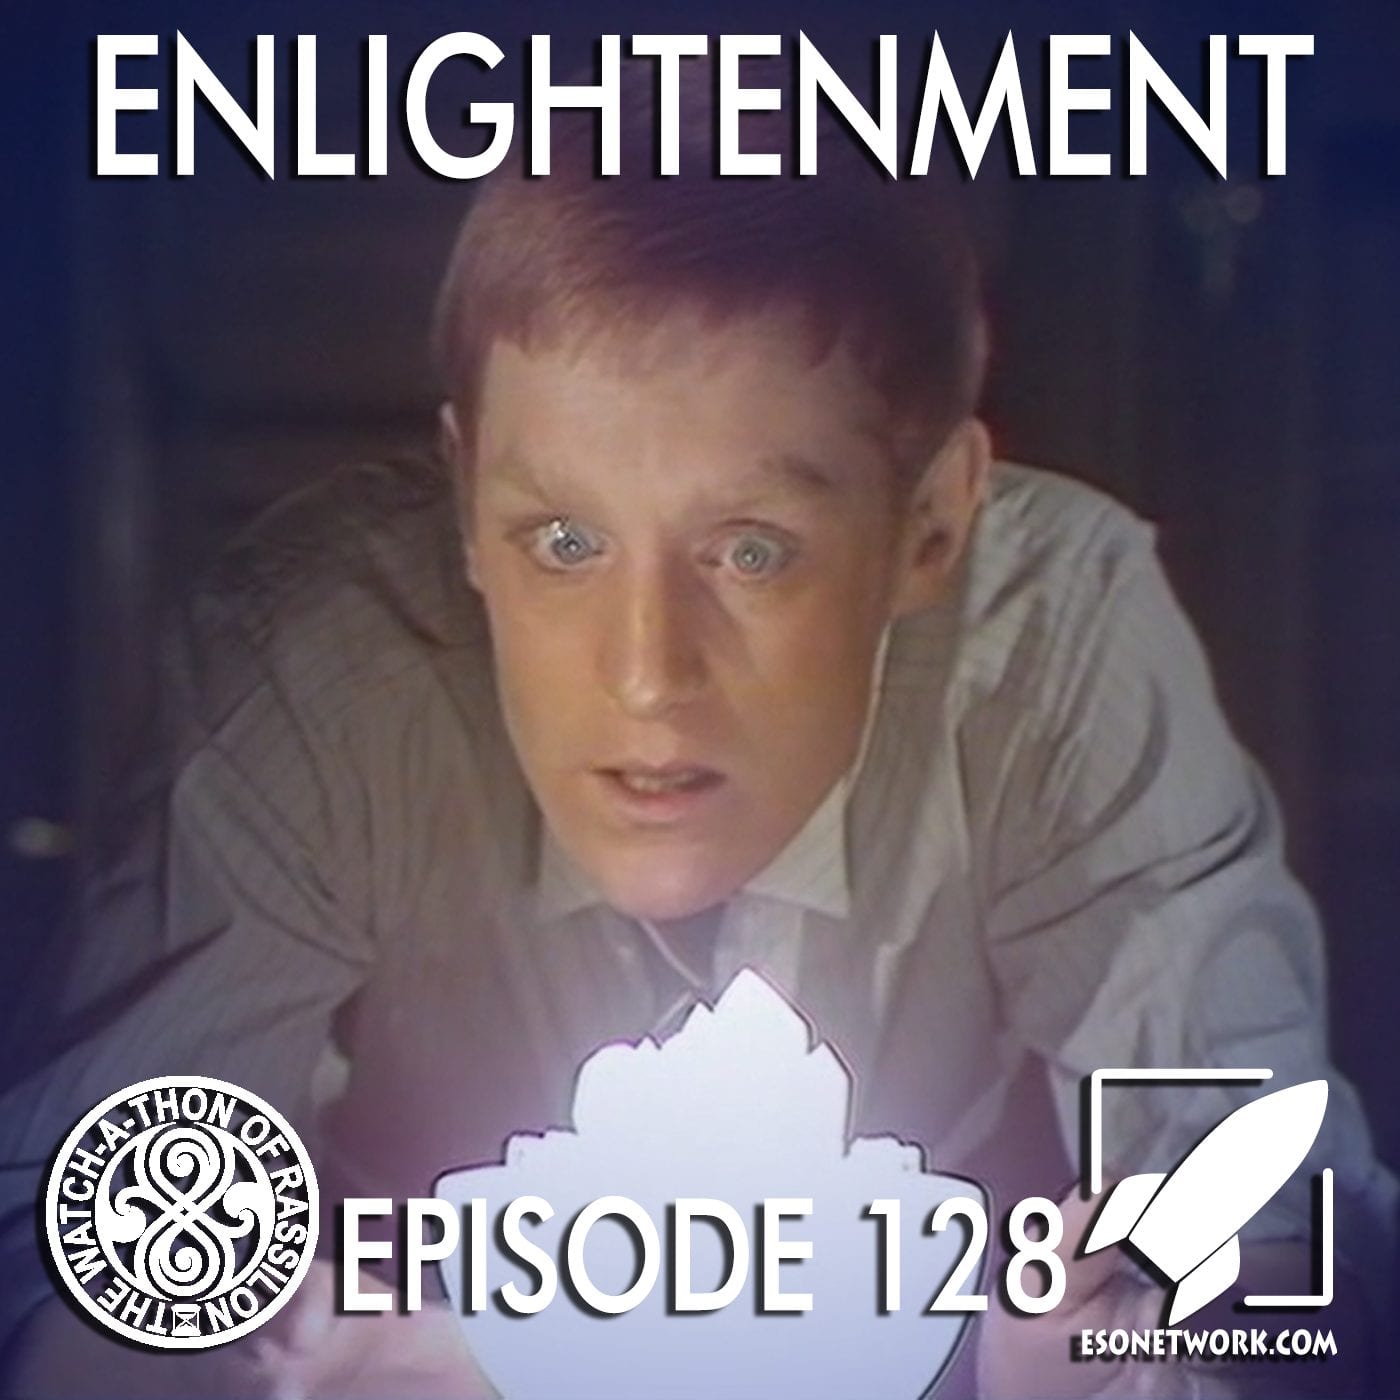 The Watch-A-Thon of Rassilon: Episode 128: Enlightenment